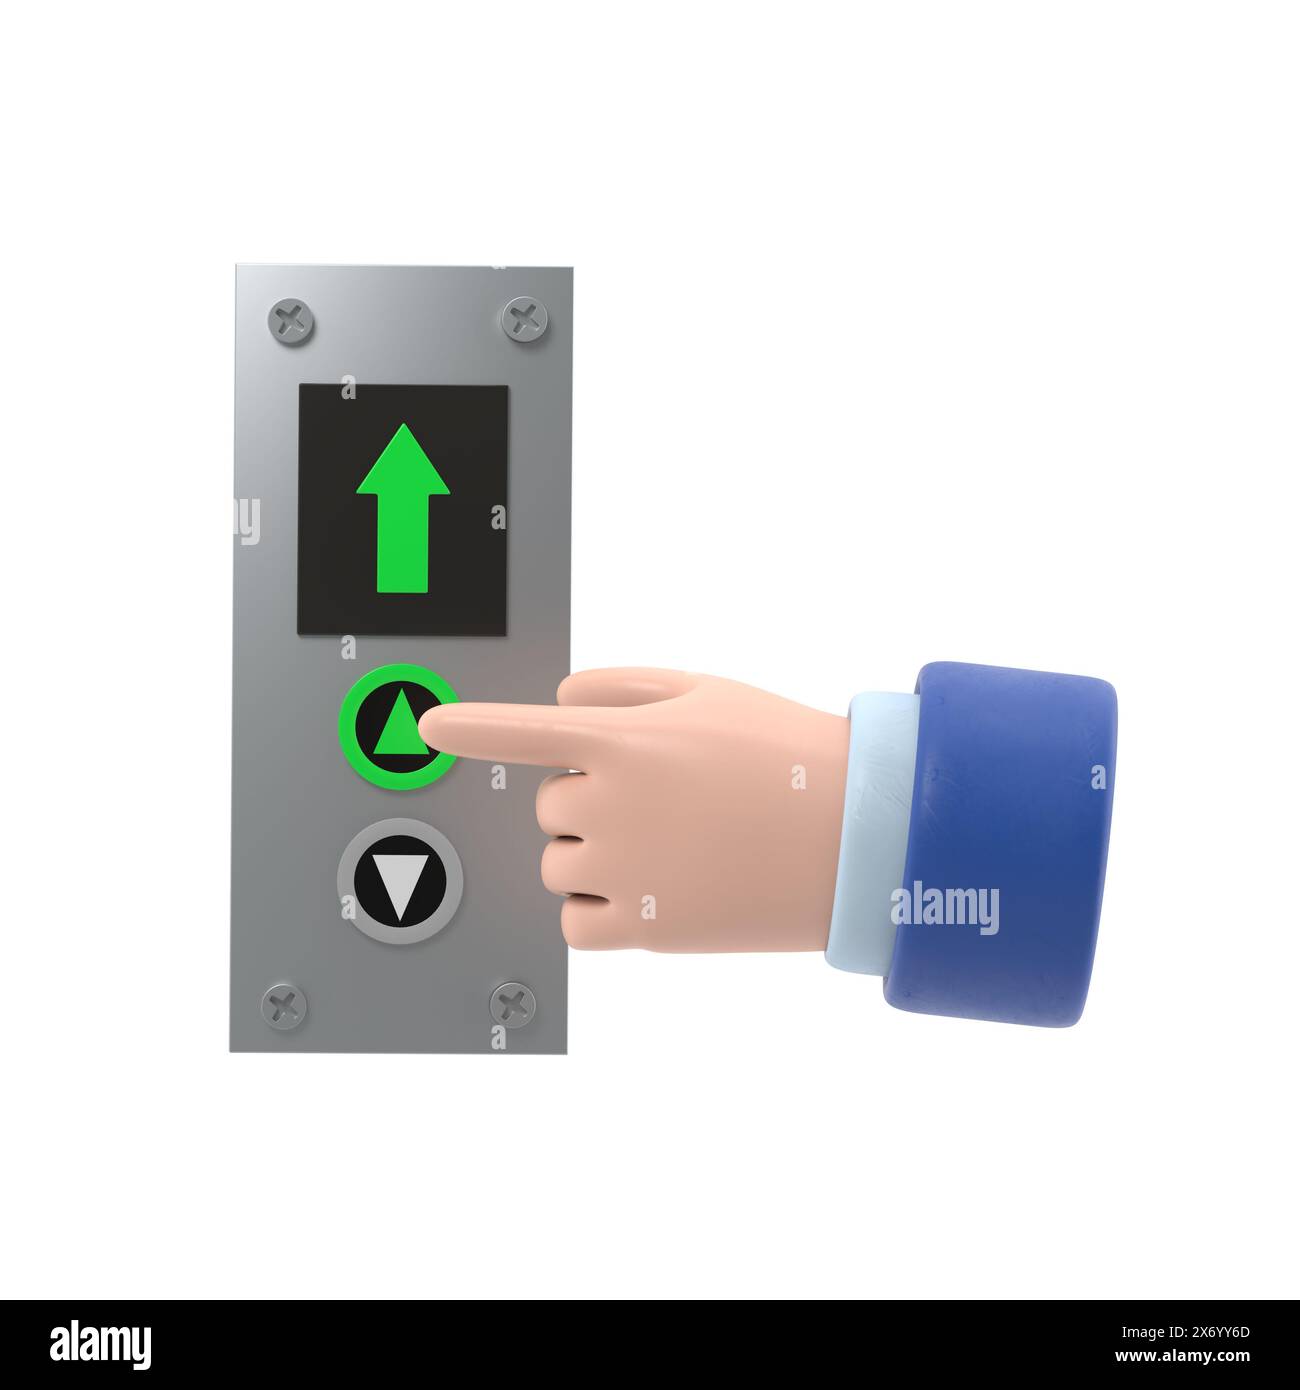 Businessman presses the lift button. 3d illustration flat design.Call elevator. Up arrow. Rise to the top floor. Finger on the button.3D rendering on Stock Photo